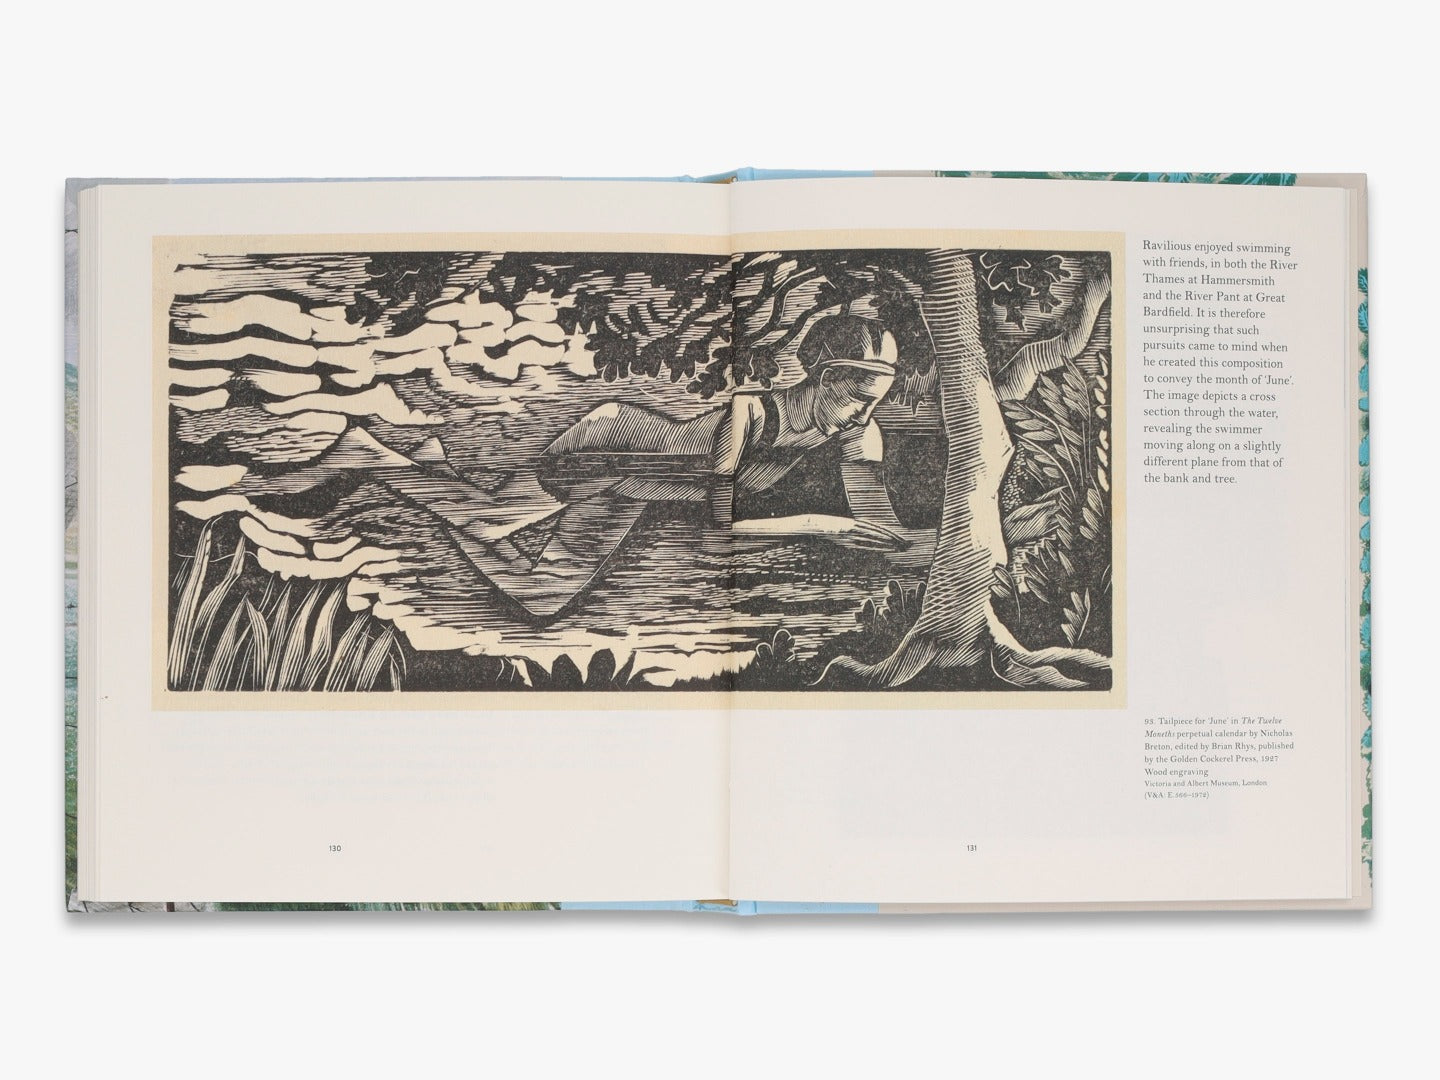 Page of 'Eric Ravilious: Landscapes & Nature' with text and artwork of a swimmer